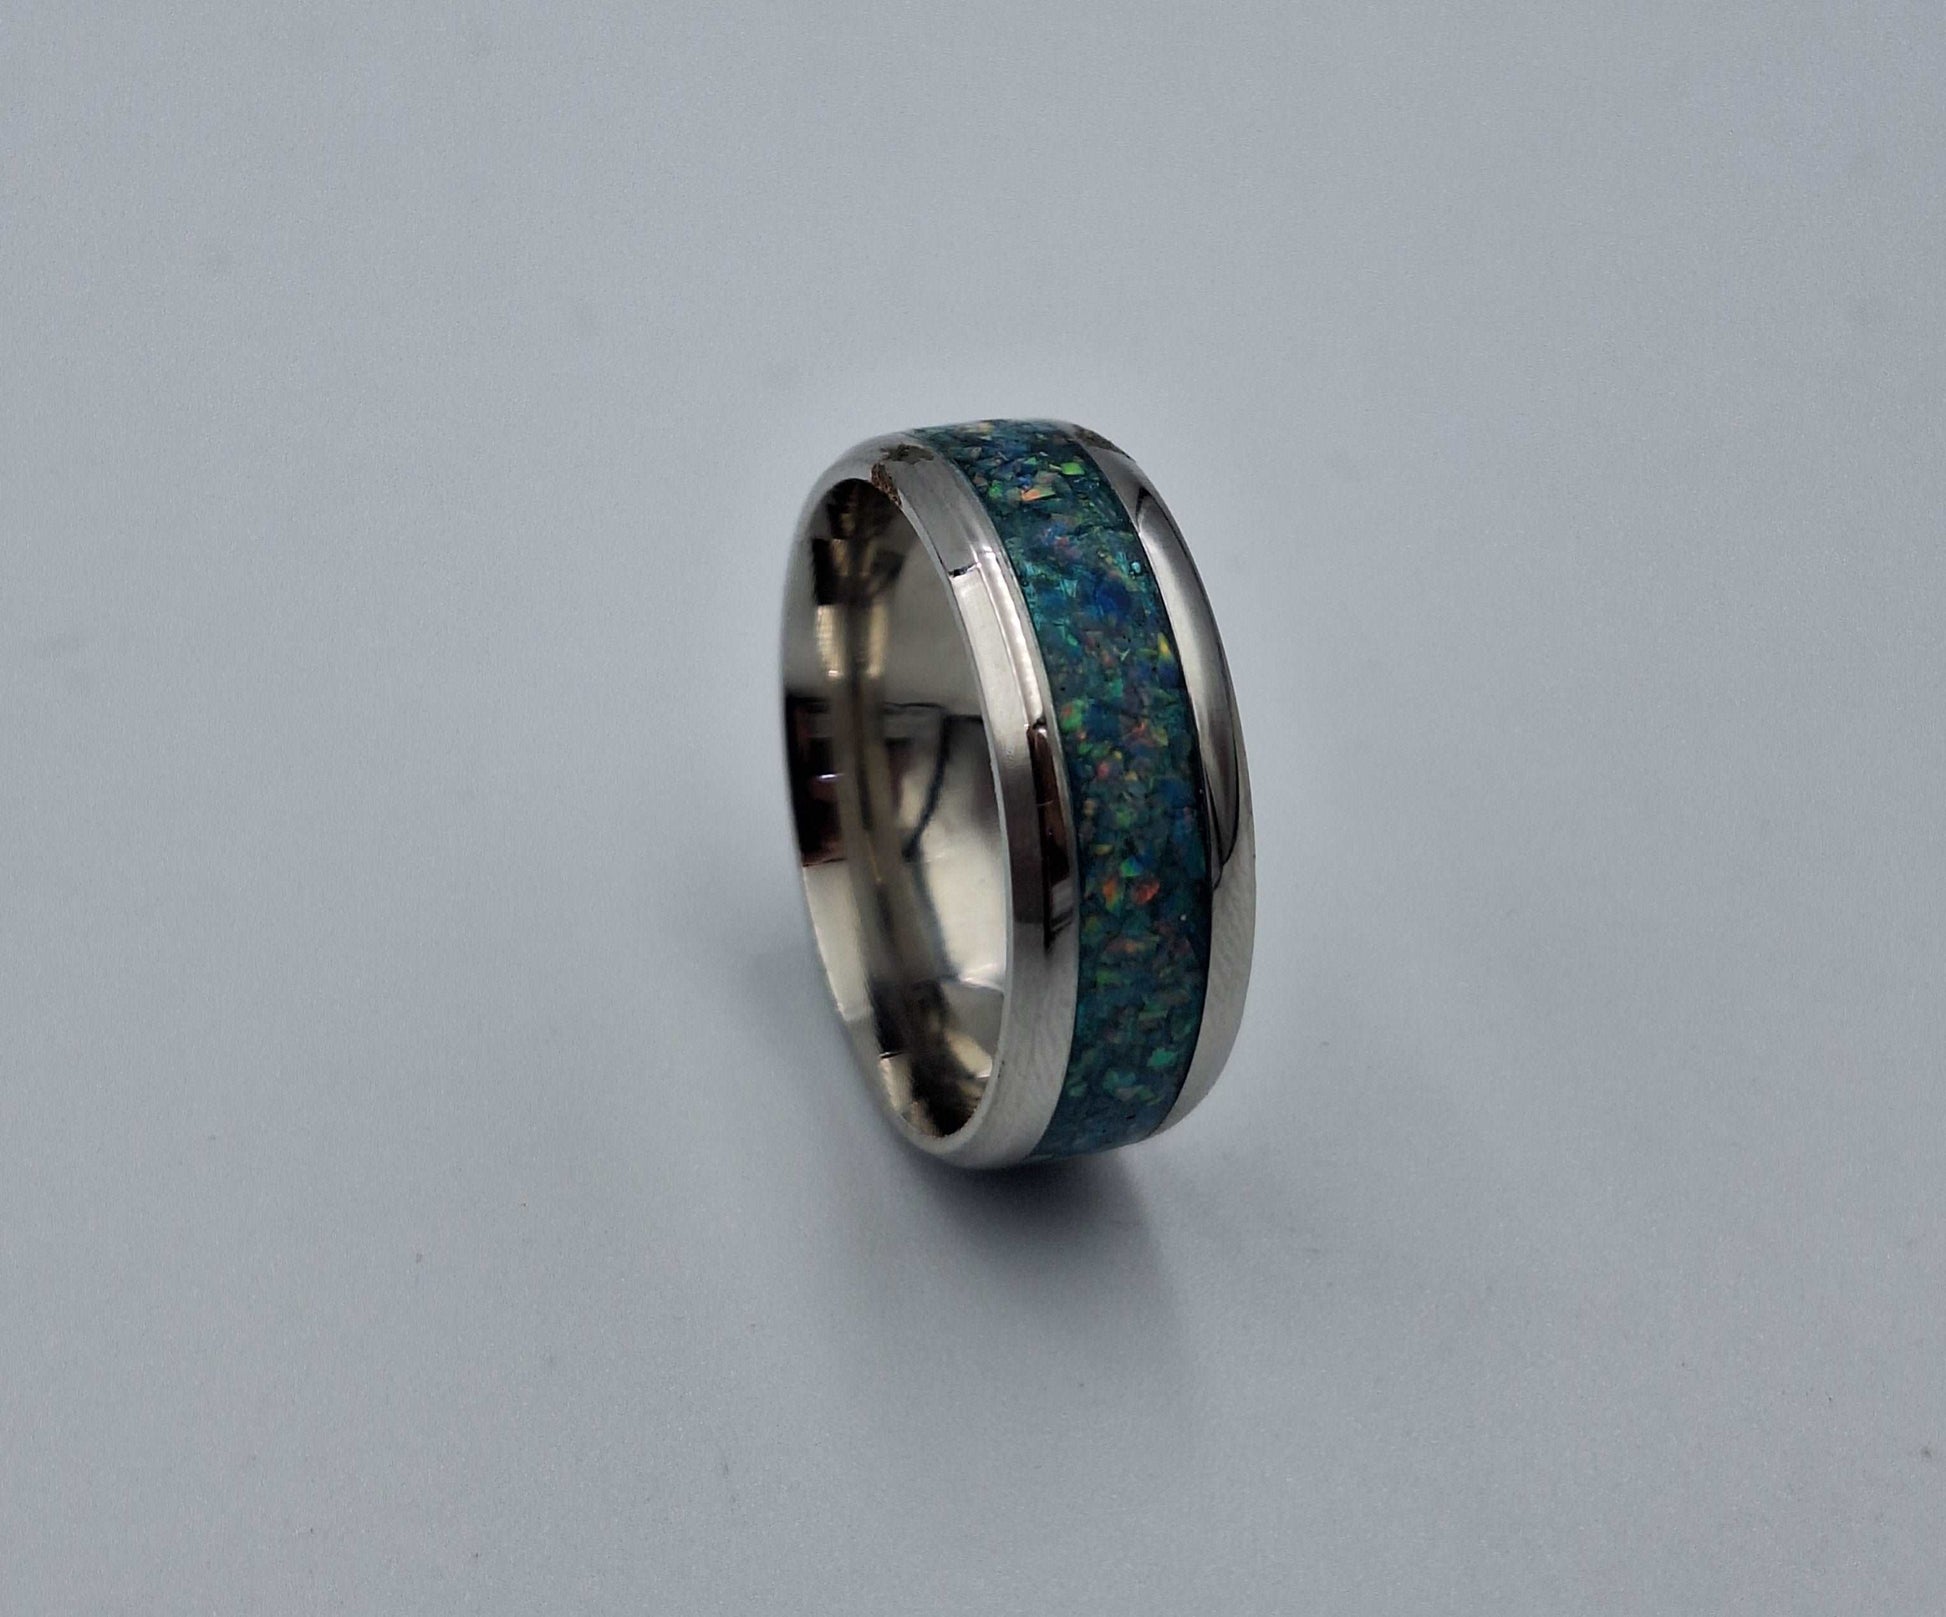 Stainless Steel 8mm Ring With Crushed Opals - Size 10